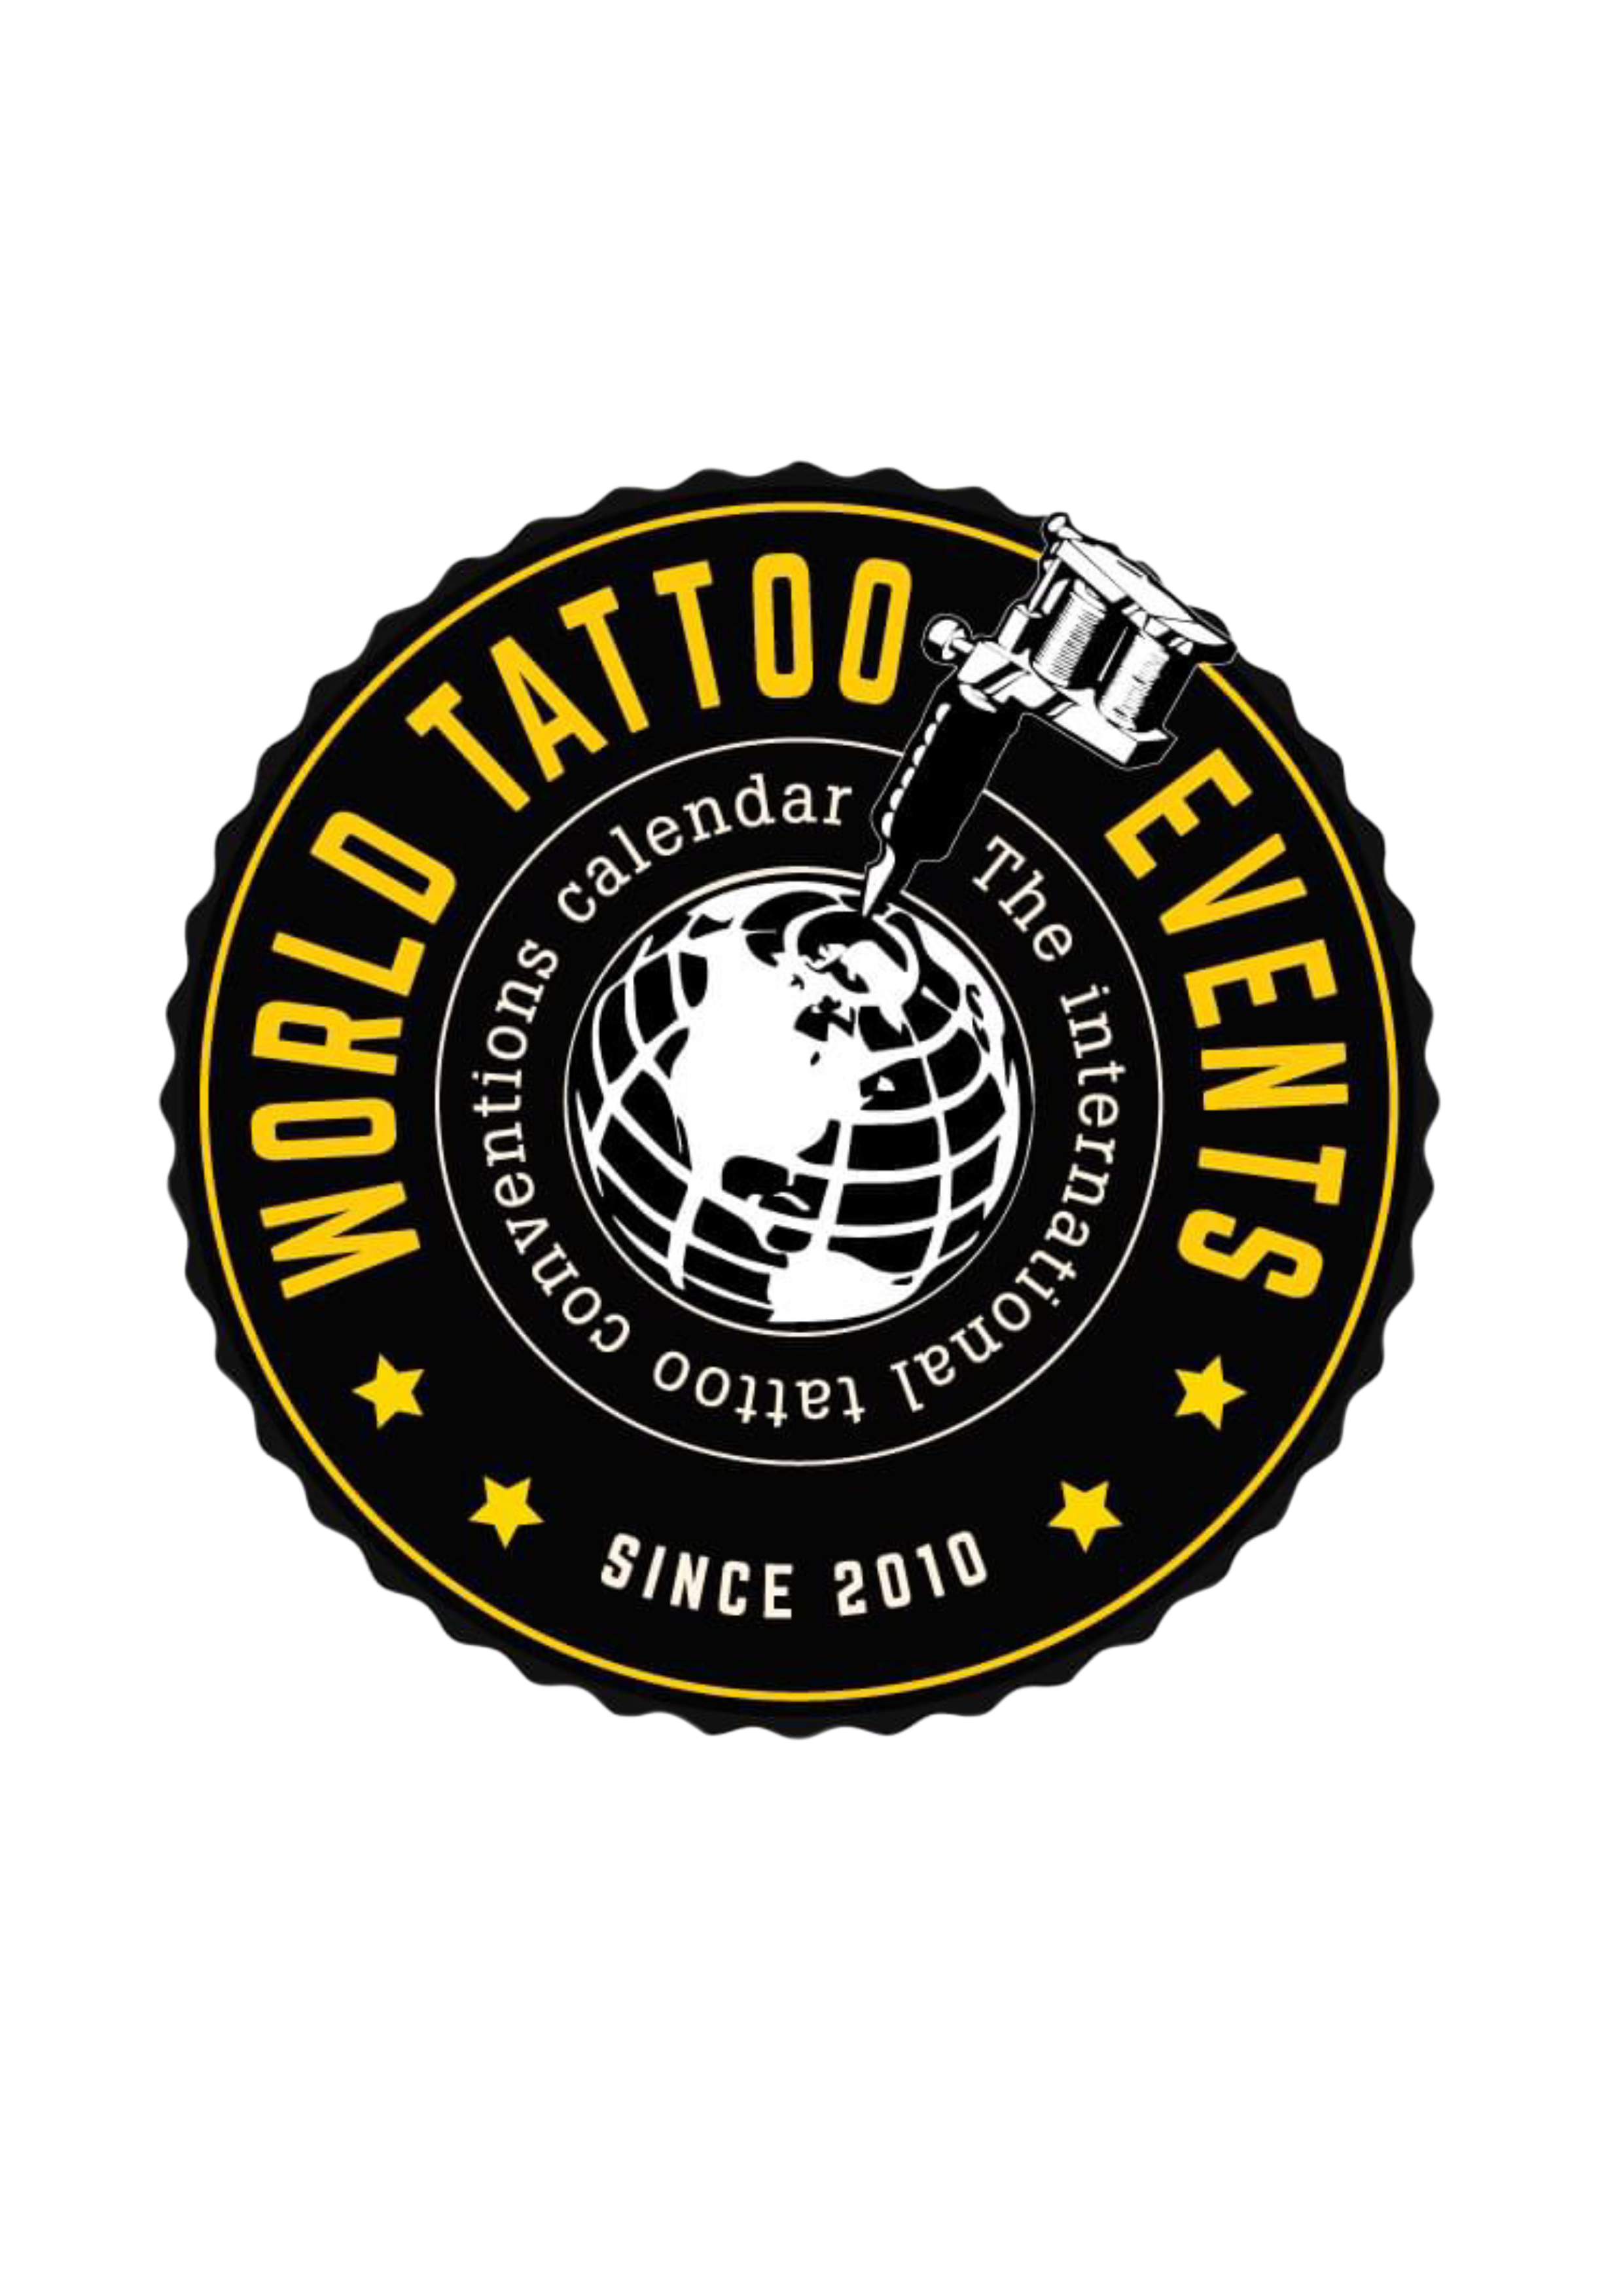 The Future of Tattoo Conventions 1 year later - Live Panel - YouTube